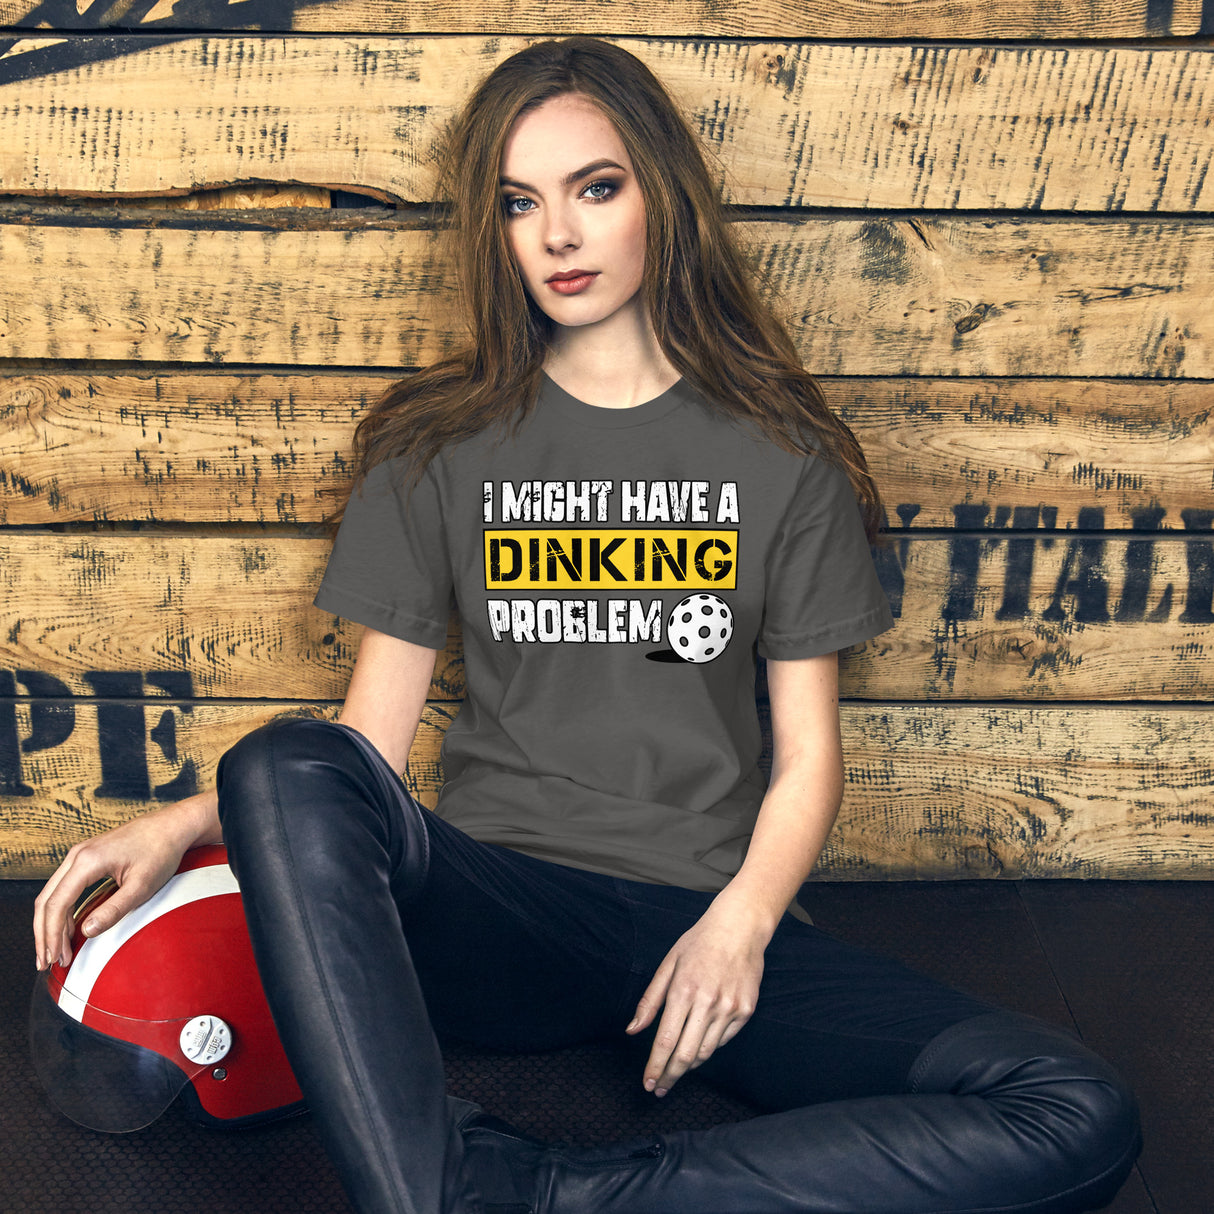 I Might Have a Dinking Problem Women's Shirt